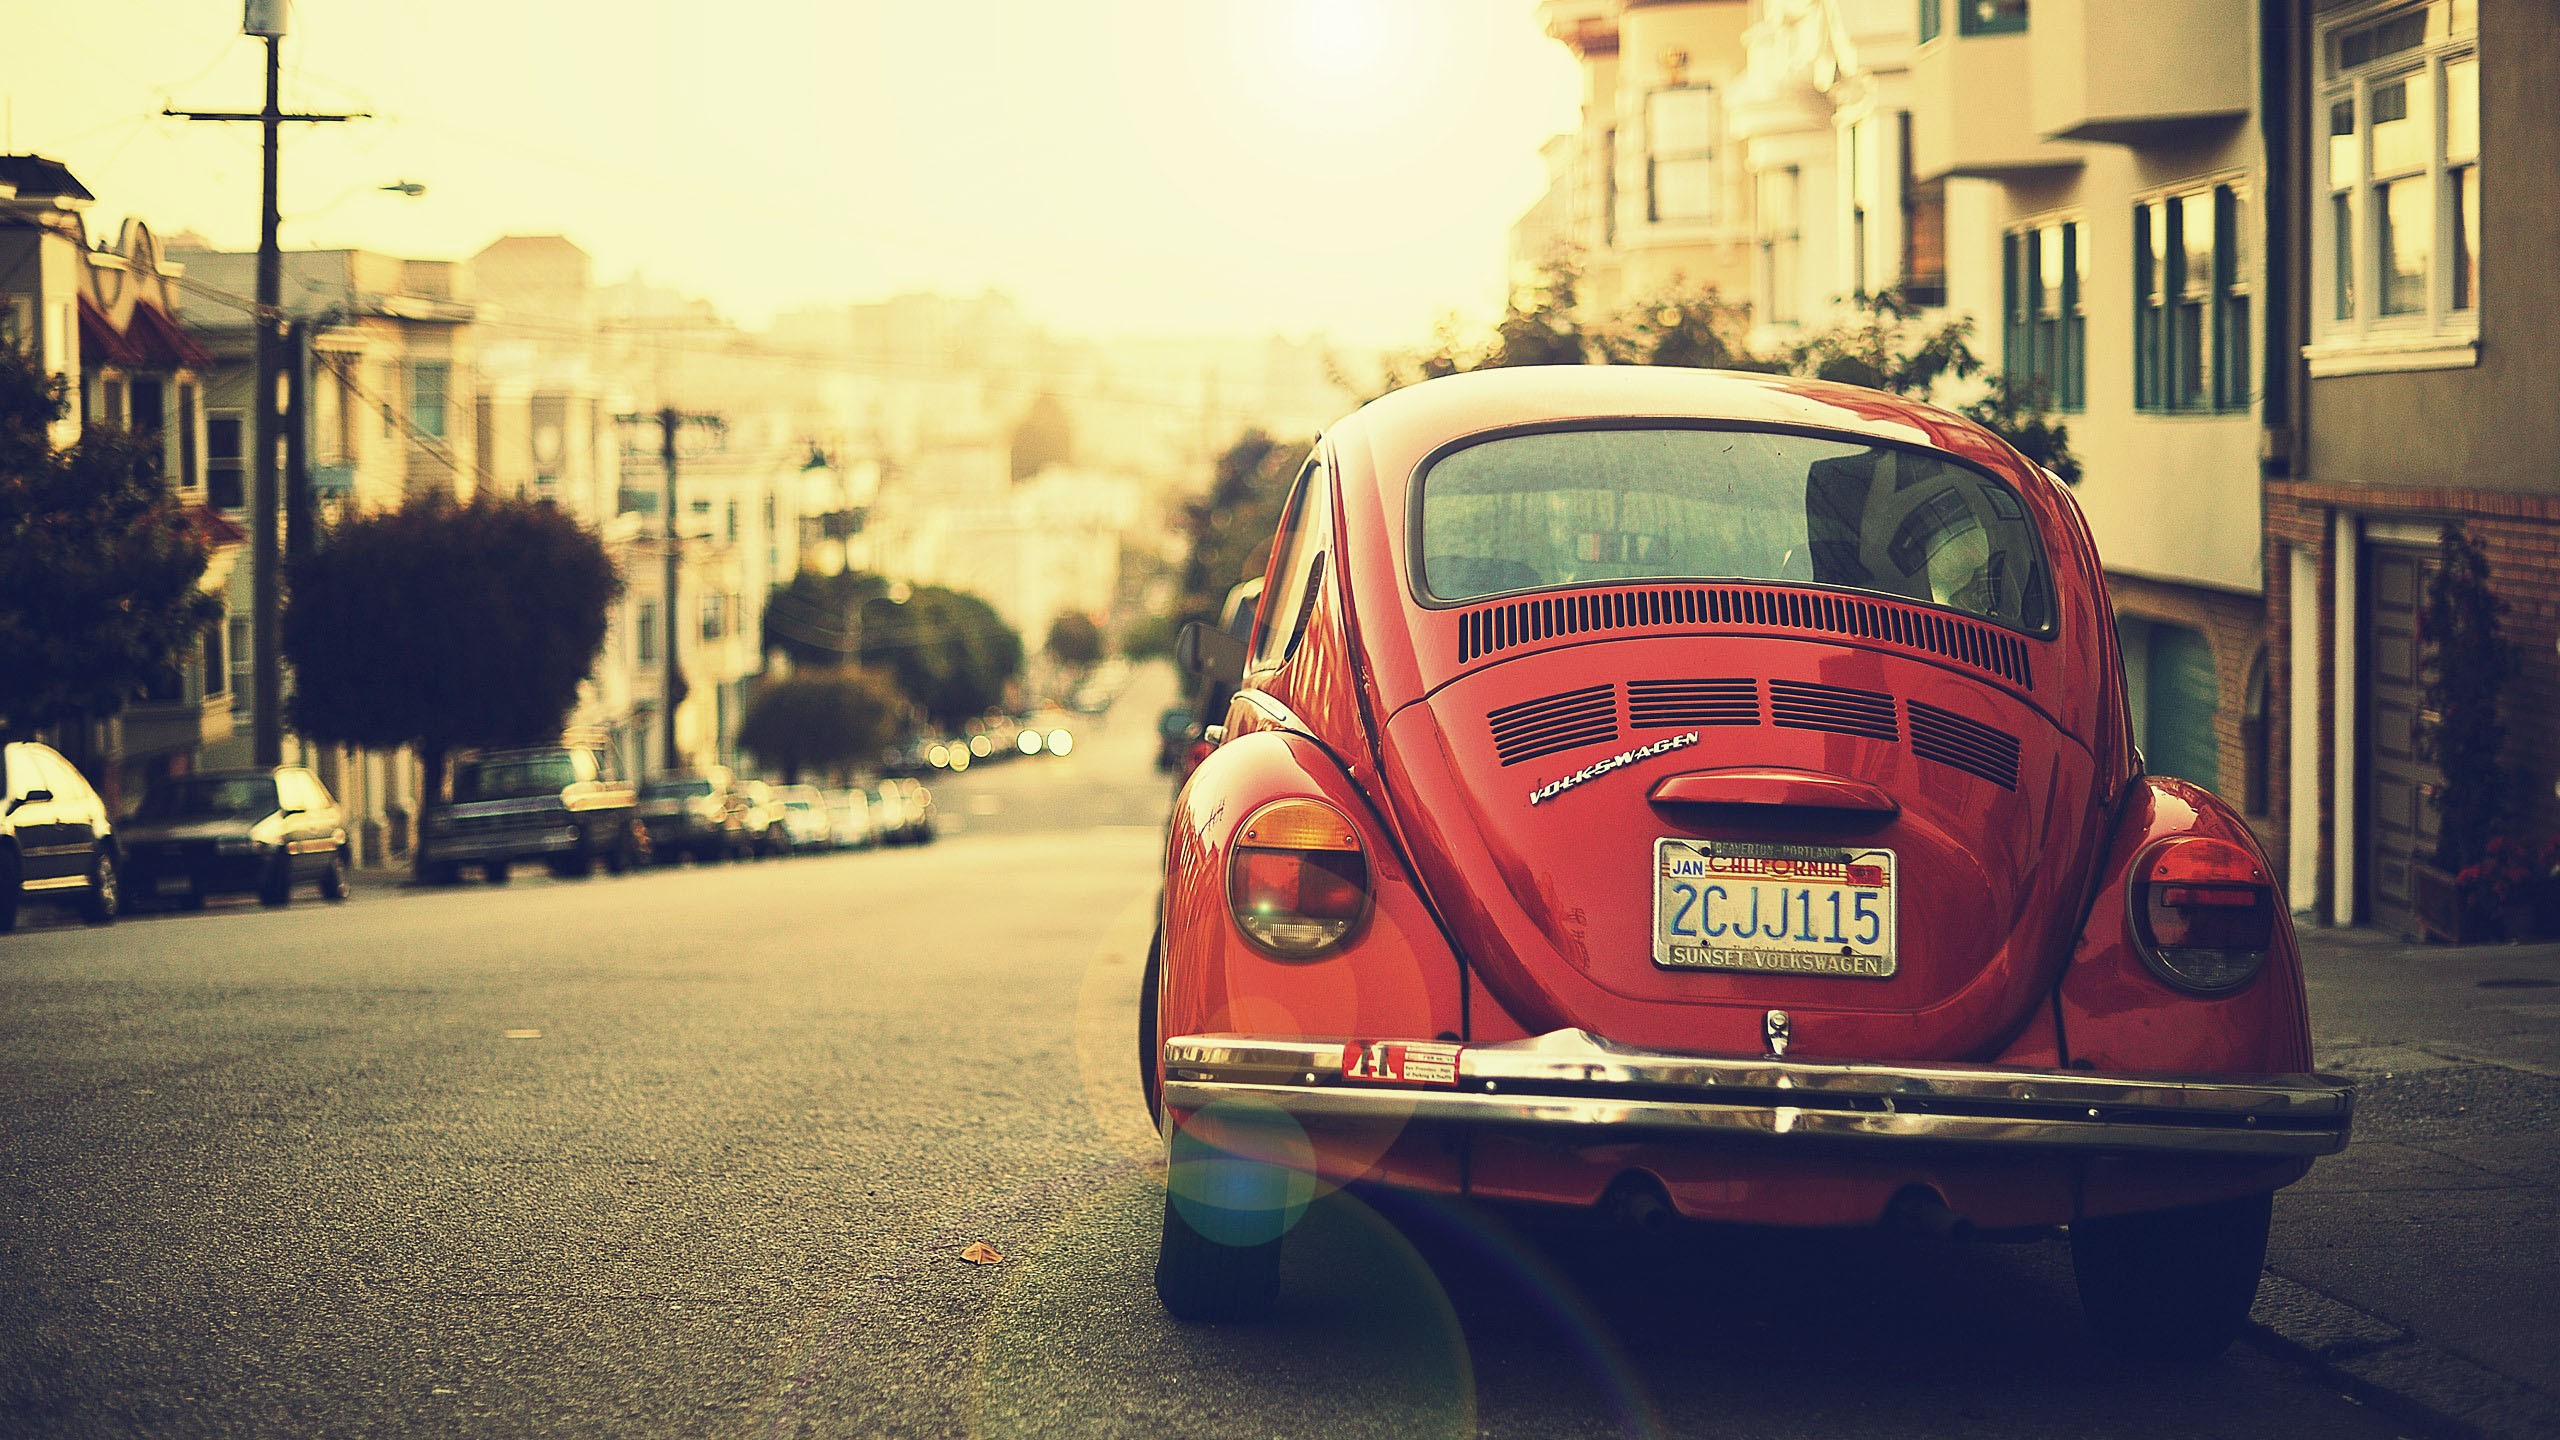 Volkswagen Beetle Vintage Photography HD Wallpaper Is a Awesome HD 2560x1440